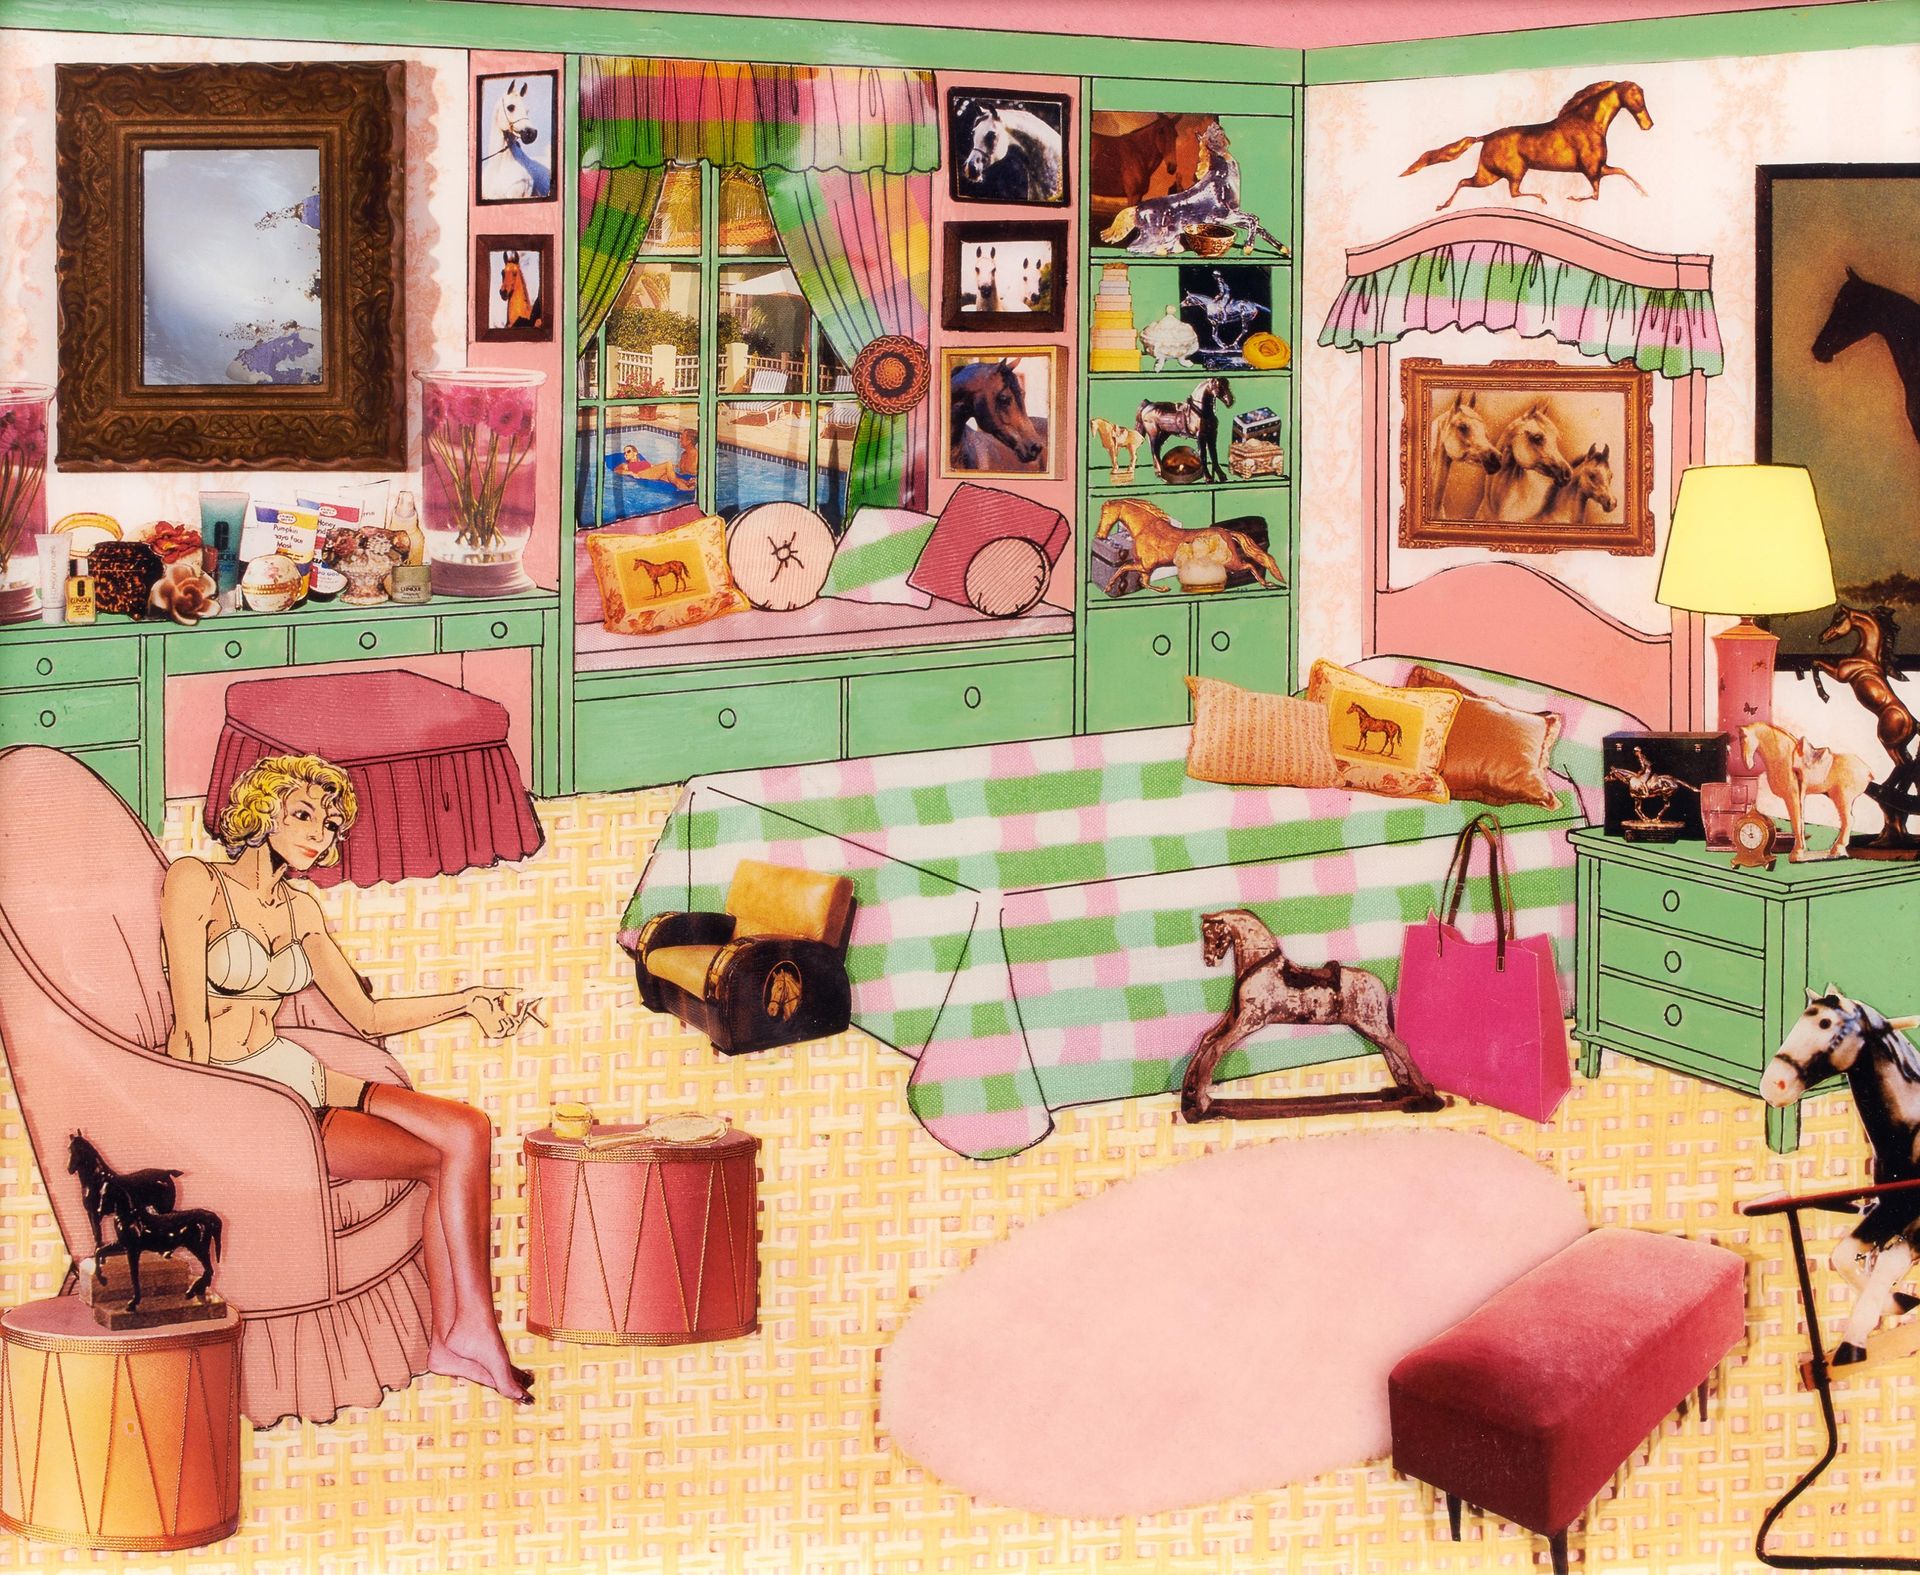 Laurie Simmons SIMMONS, LAURIE
1949 New York

Titre : Chambre rose et verte. 
So&hellip;